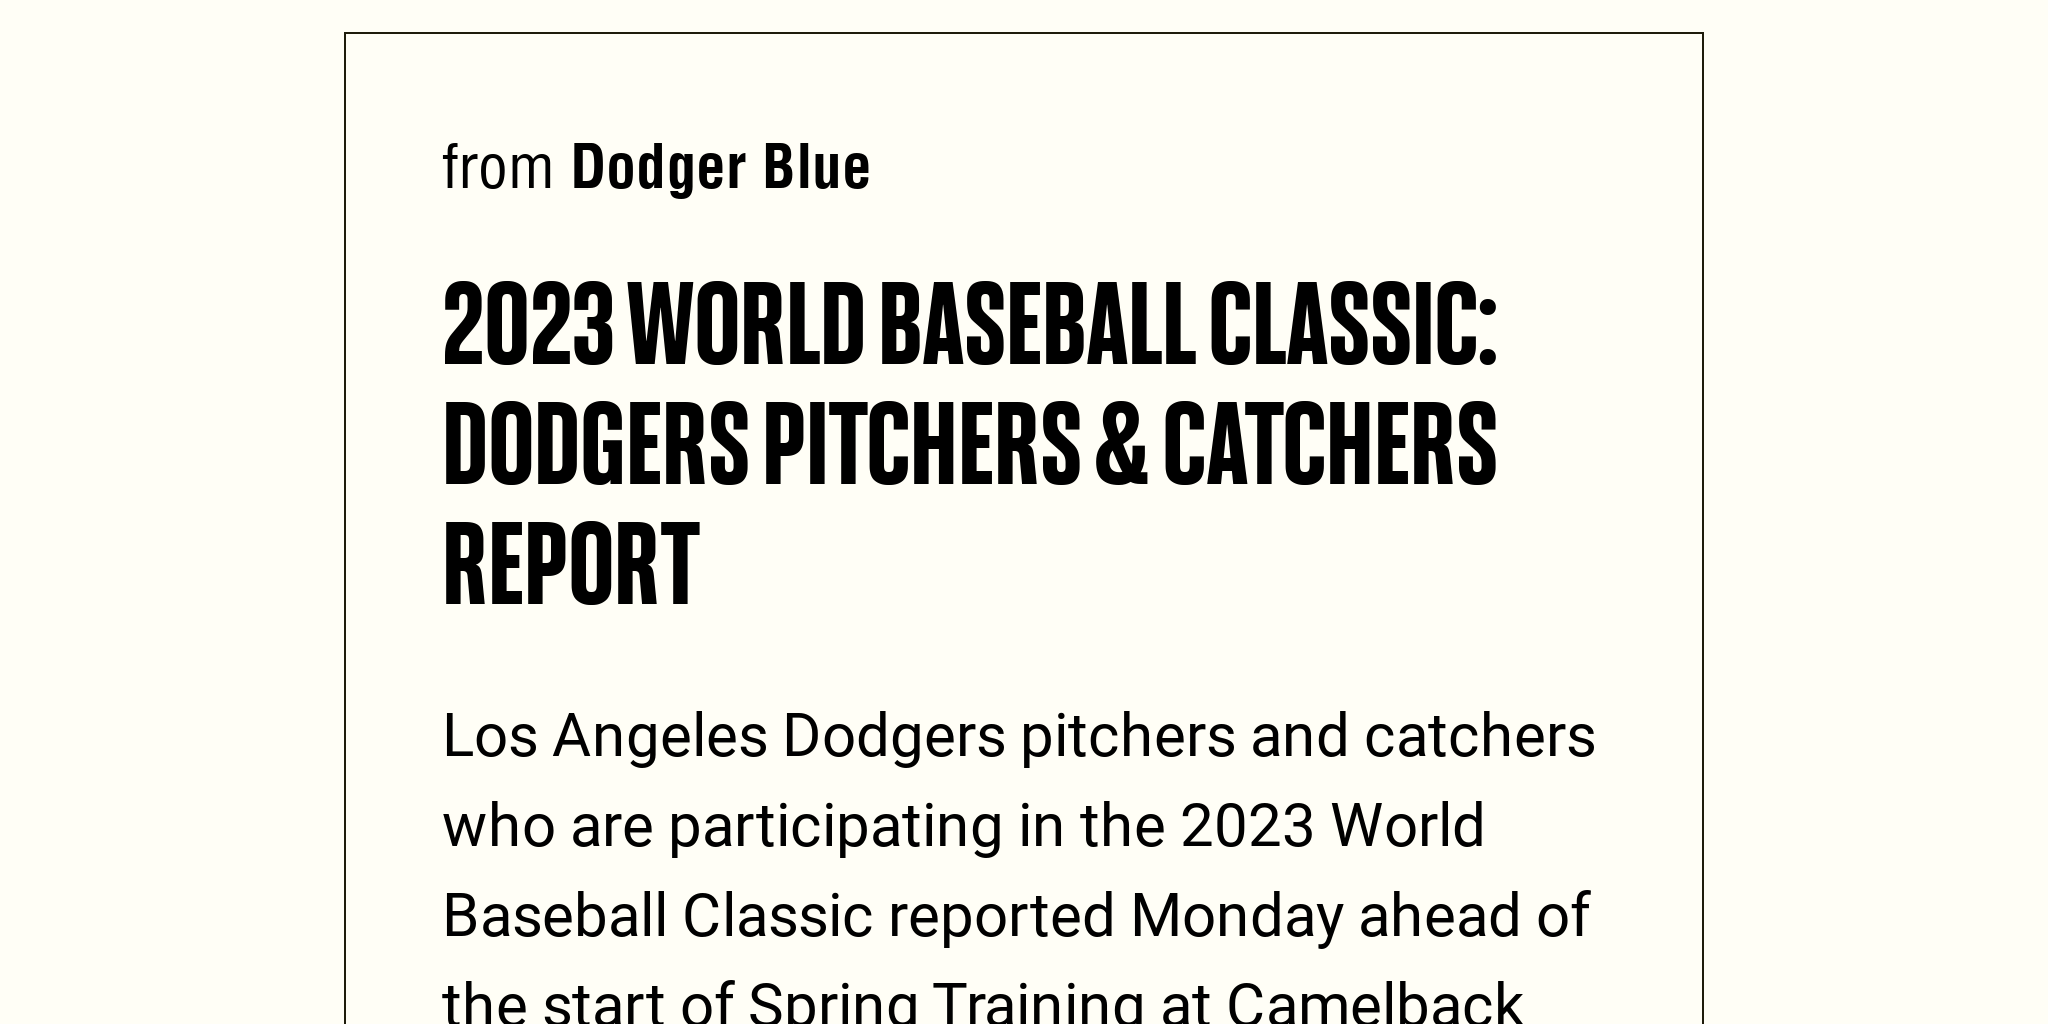 2023 World Baseball Classic Dodgers Pitchers & Catchers Report Briefly